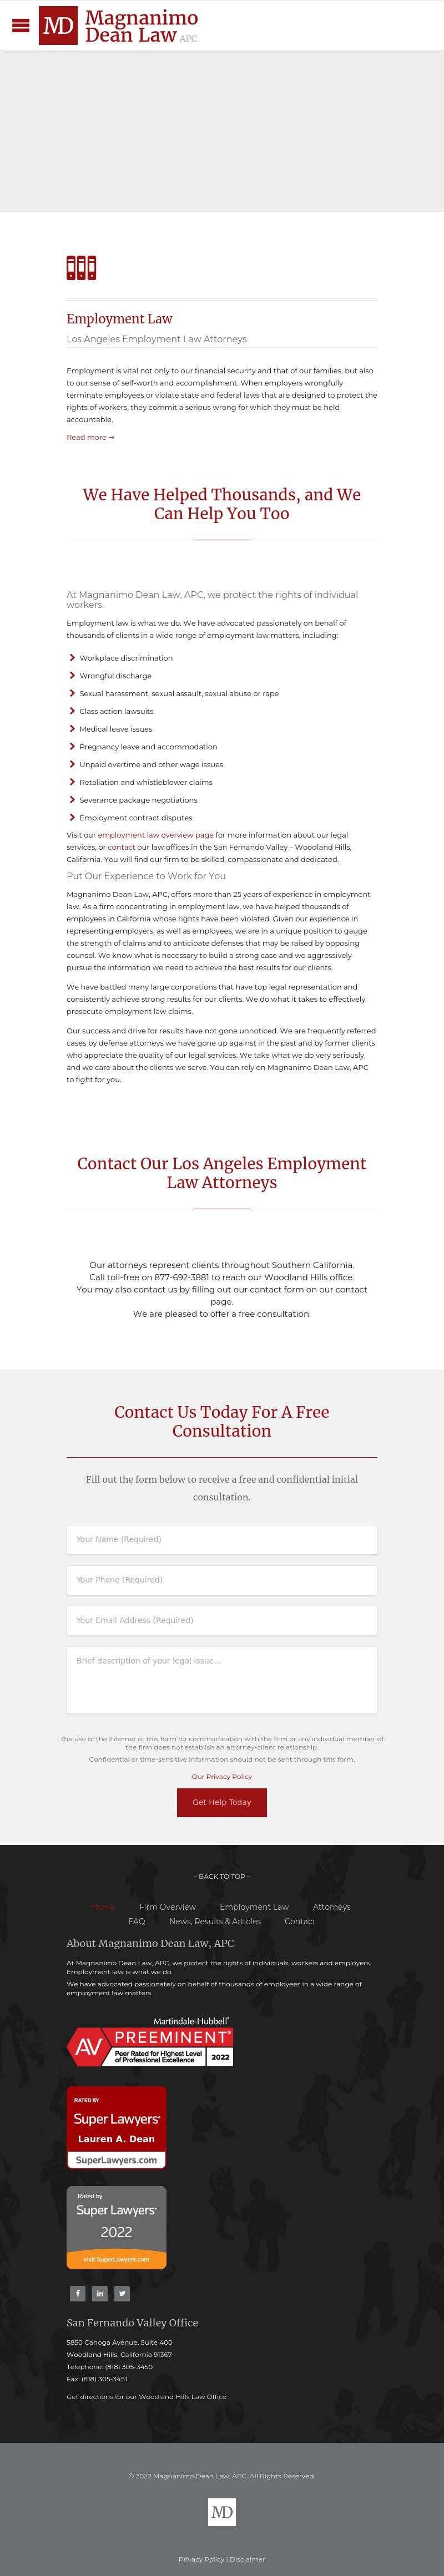 Magnanimo & Dean, LLP - Los Angeles CA Lawyers